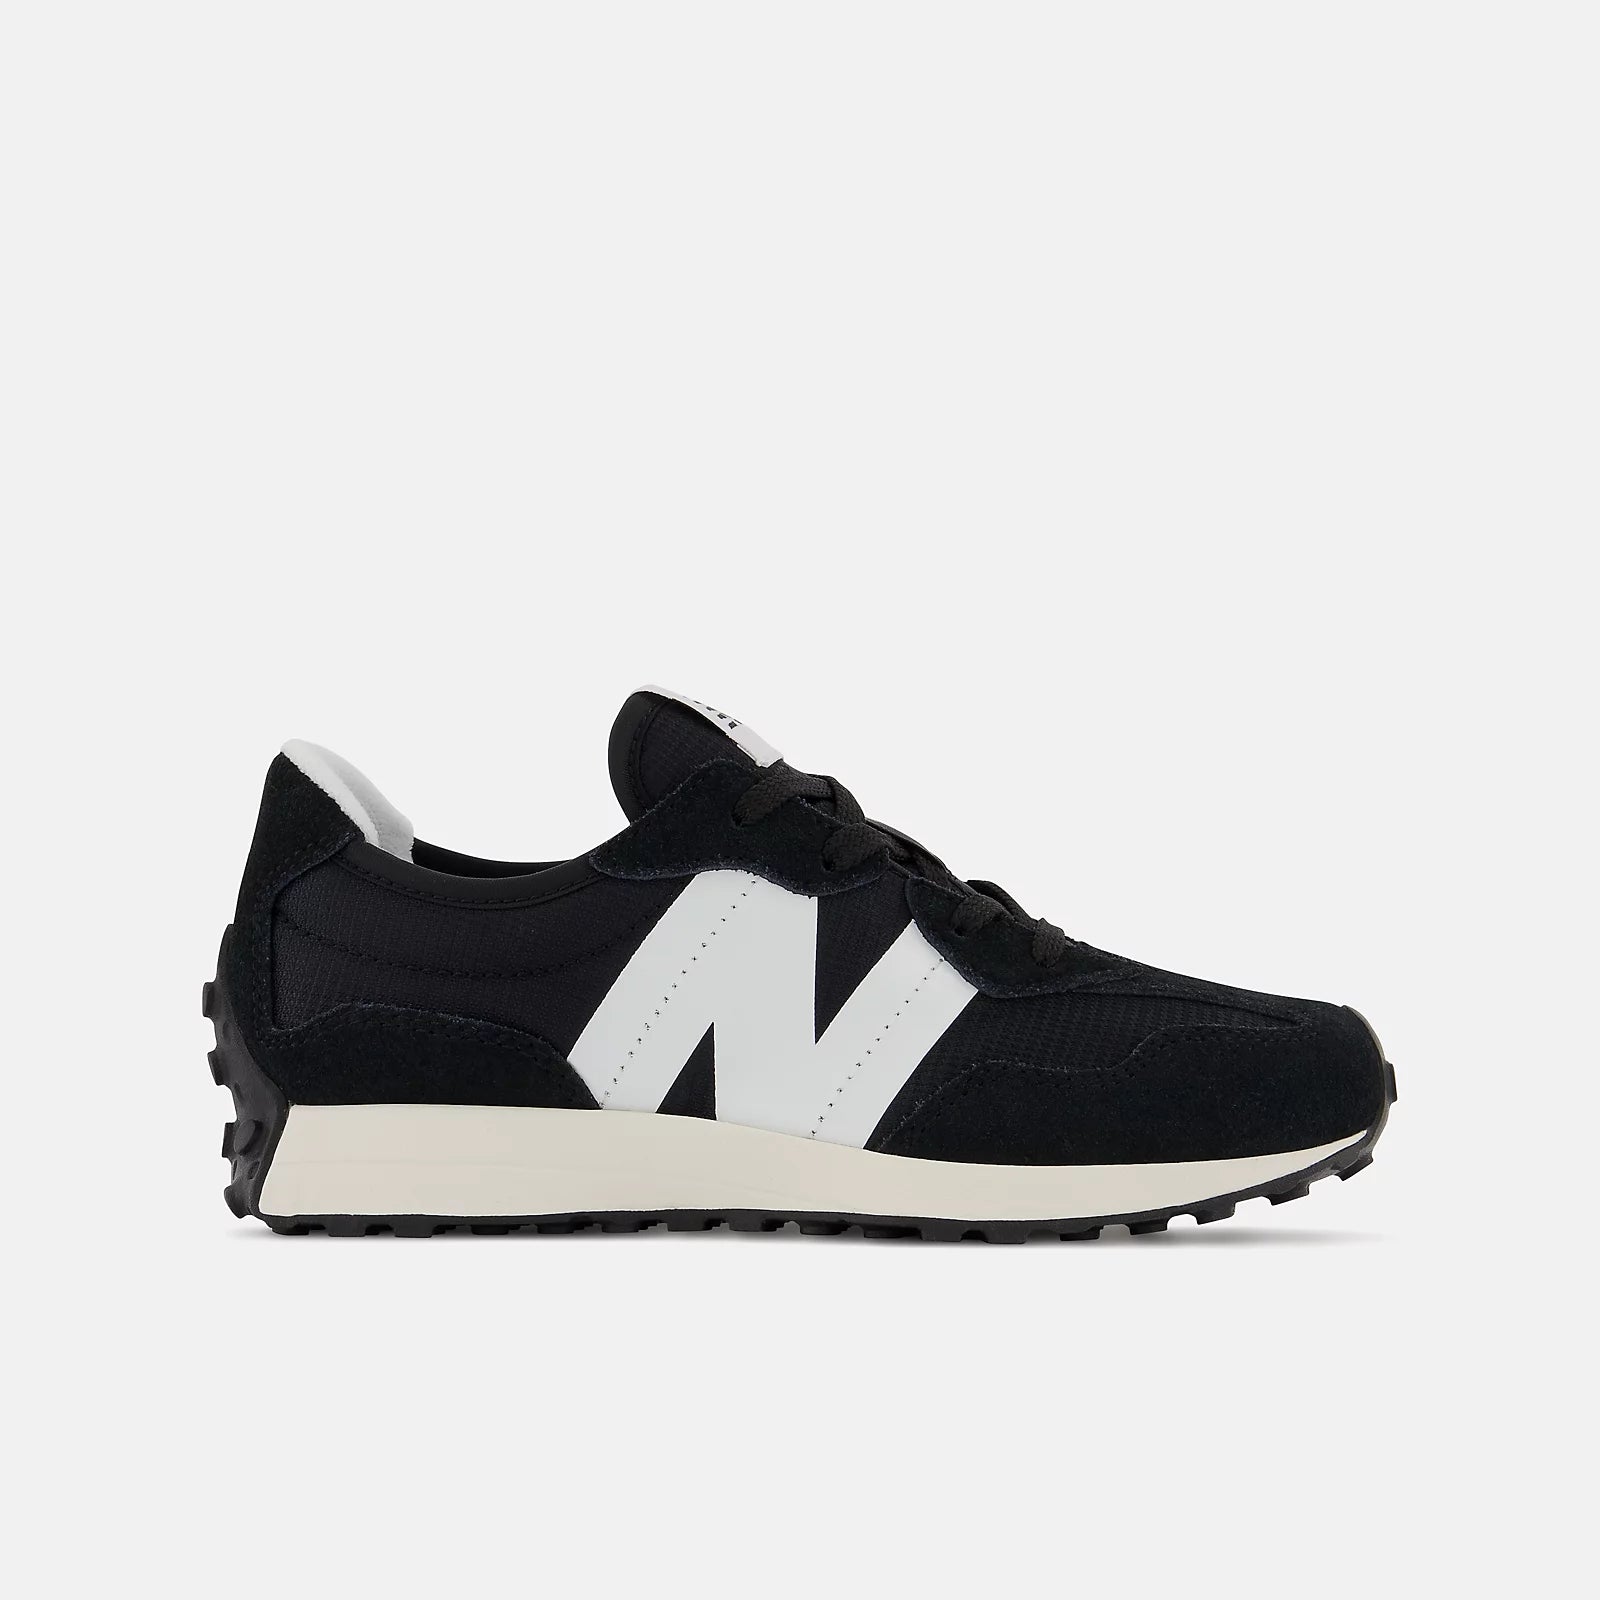 New Balance
327 lace-up logo-patch sneakers